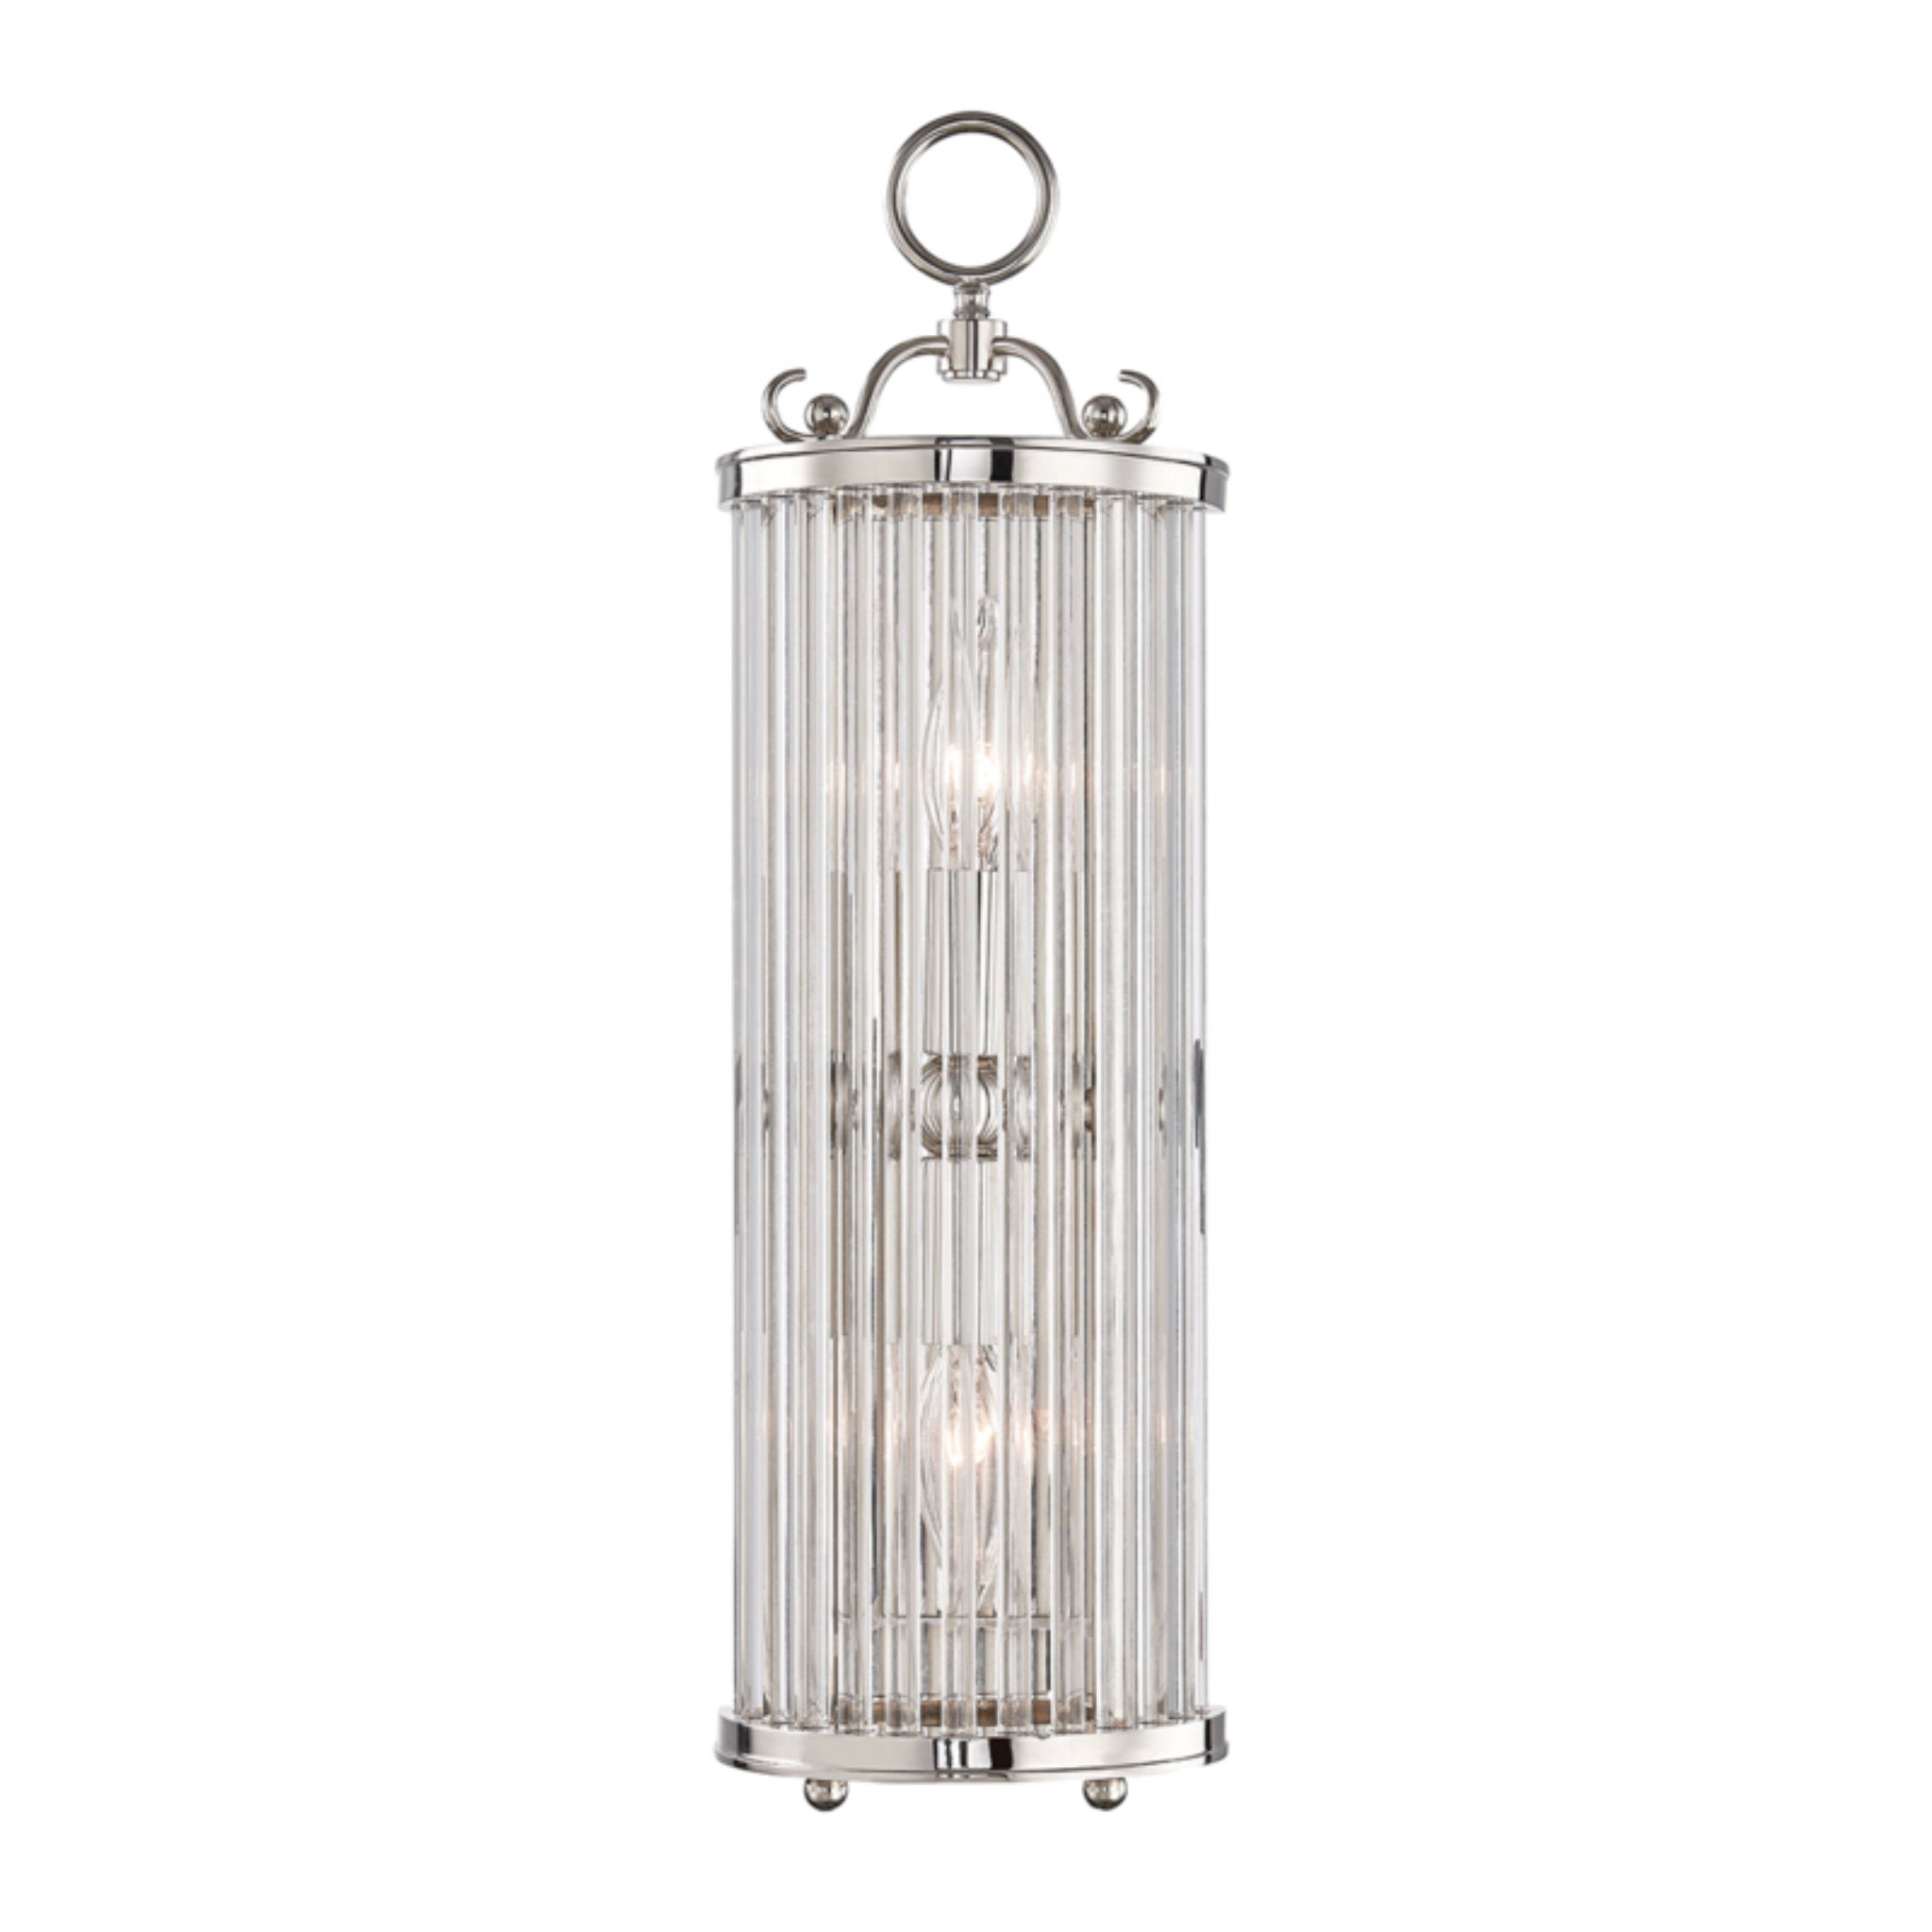 Glass No.1 2 Light Wall Sconce in Polished Nickel by Mark D. Sikes